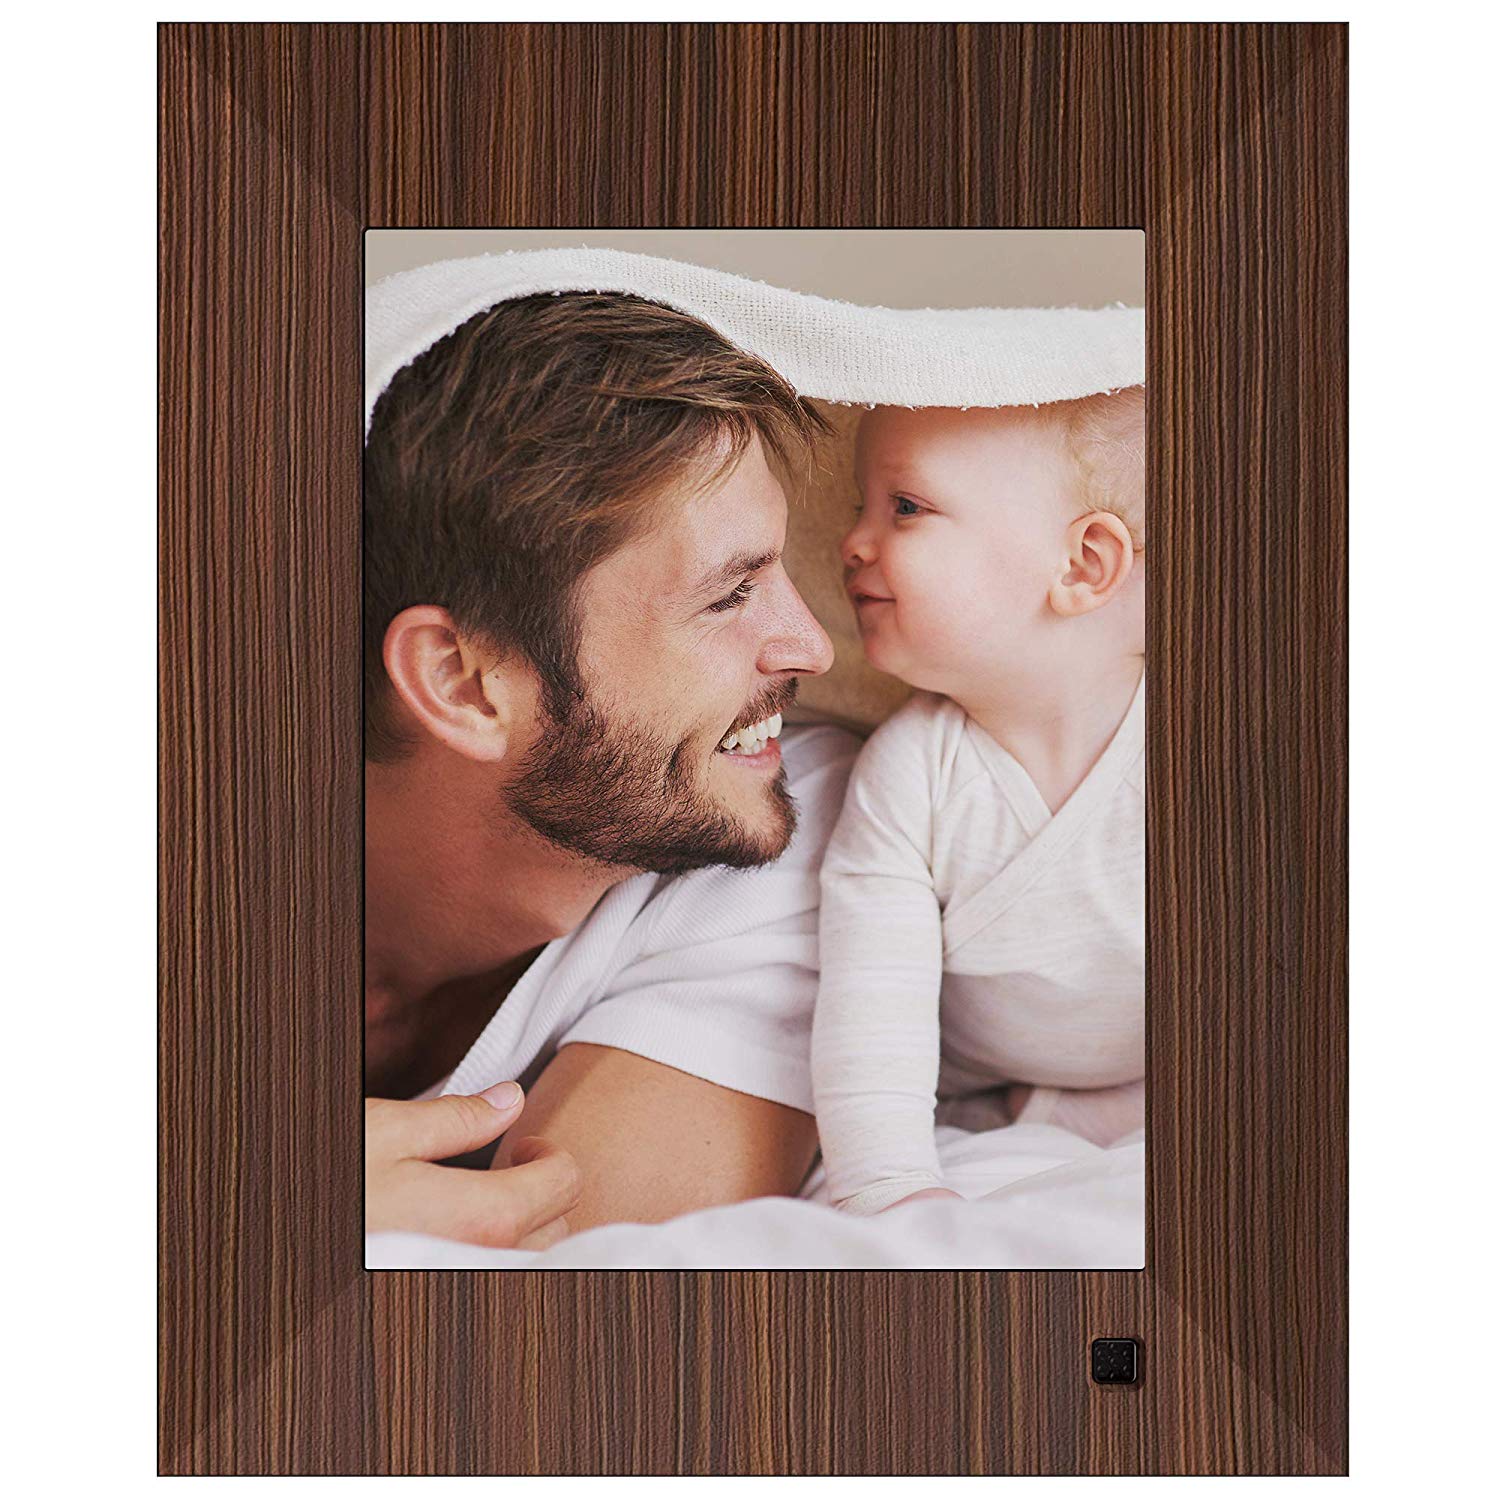 NIX Lux Digital Photo Frame 8 inch X08F, Wood. Electronic Photo Frame USB SD/SDHC. Digital Picture Frame with Motion Sensor. Control Remote and 8GB US 2